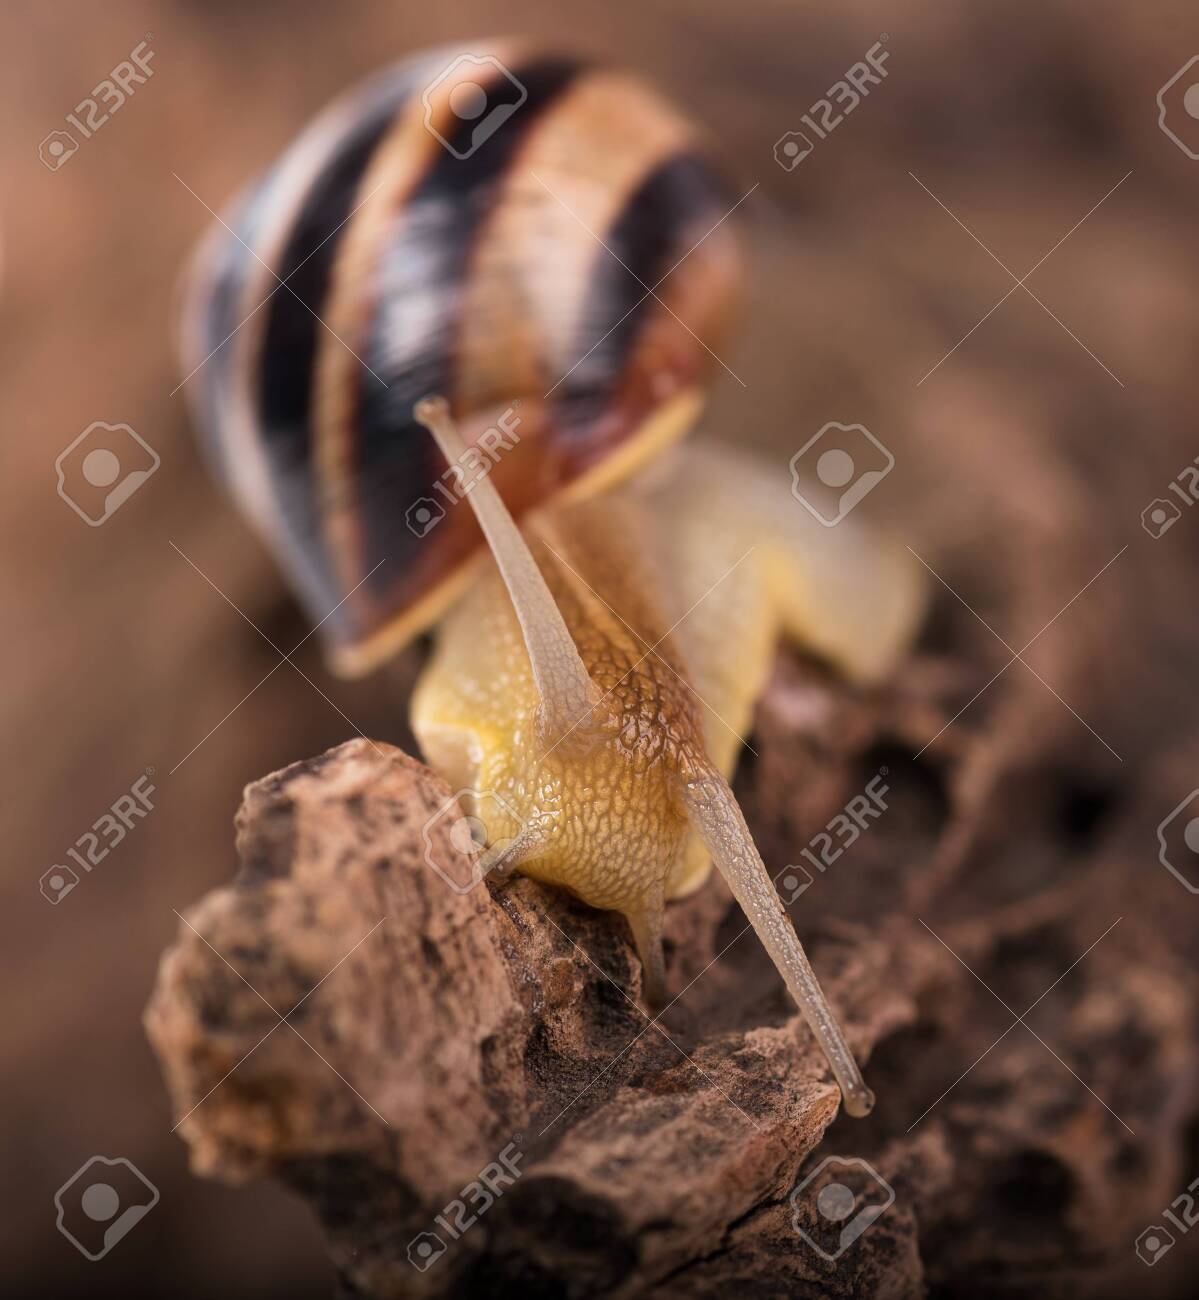 Bright Cute Snail Over The Old Stub Background Close Up Stock